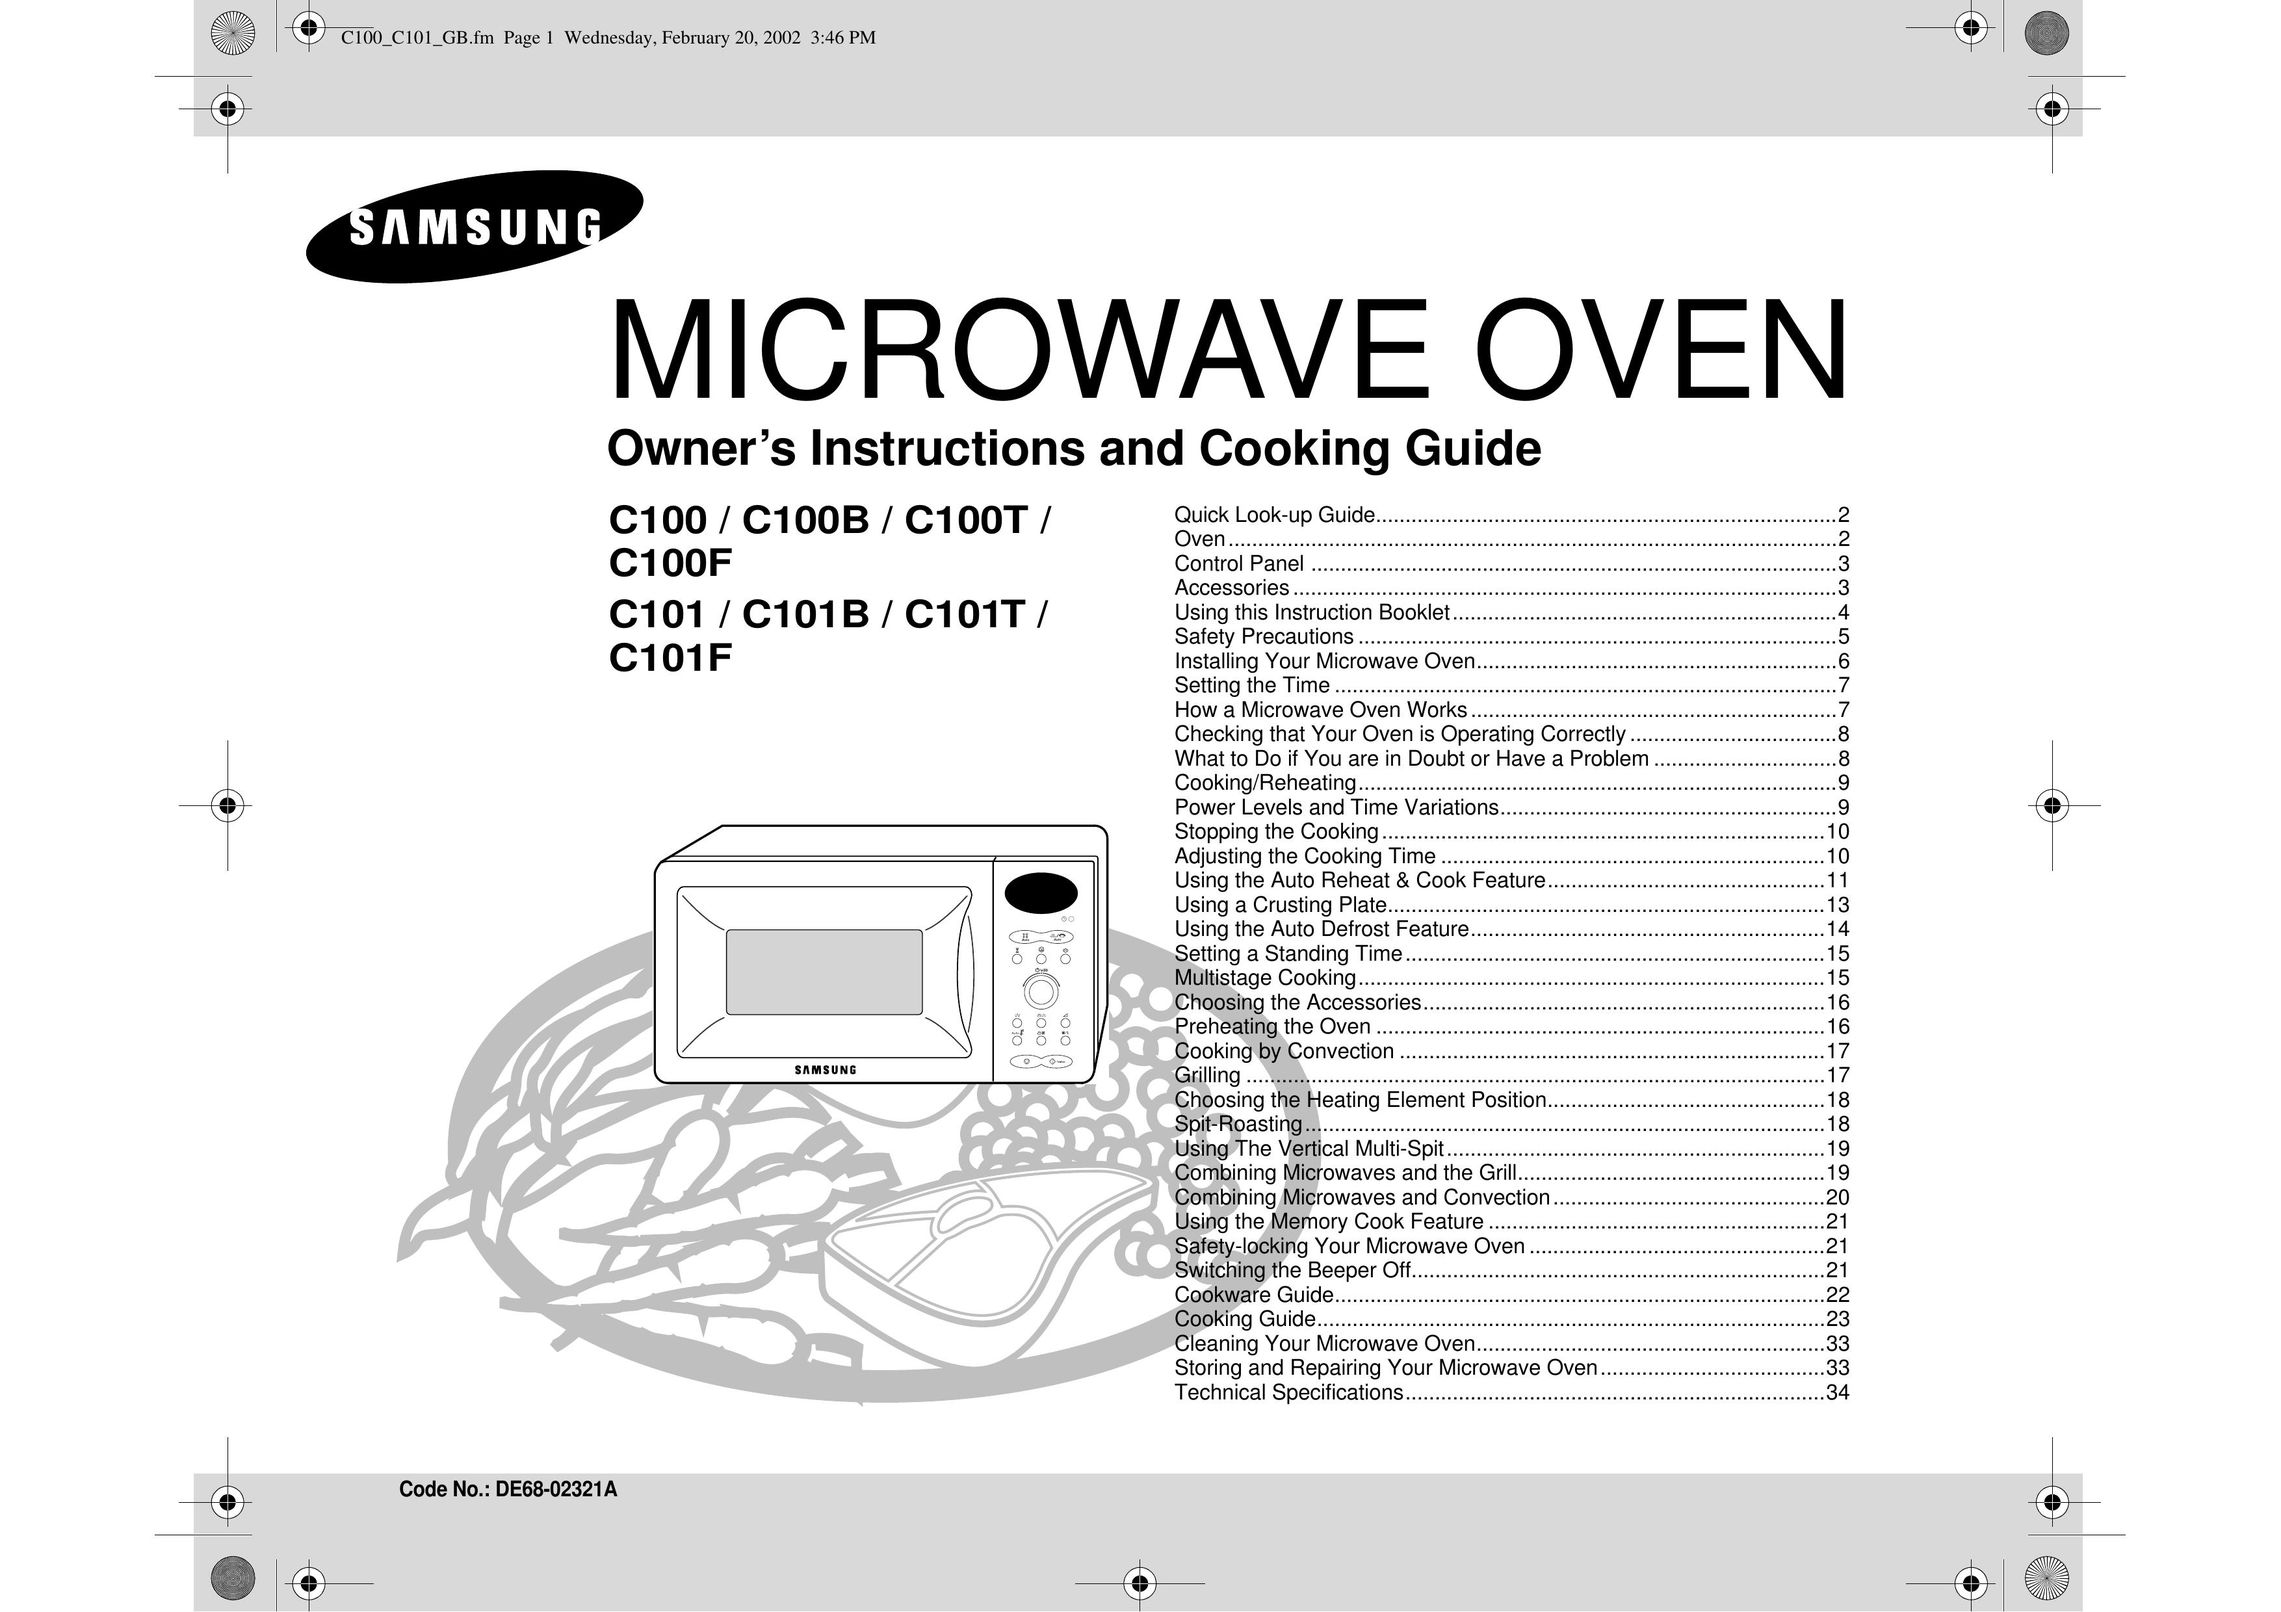 Samsung C100 Microwave Oven User Manual